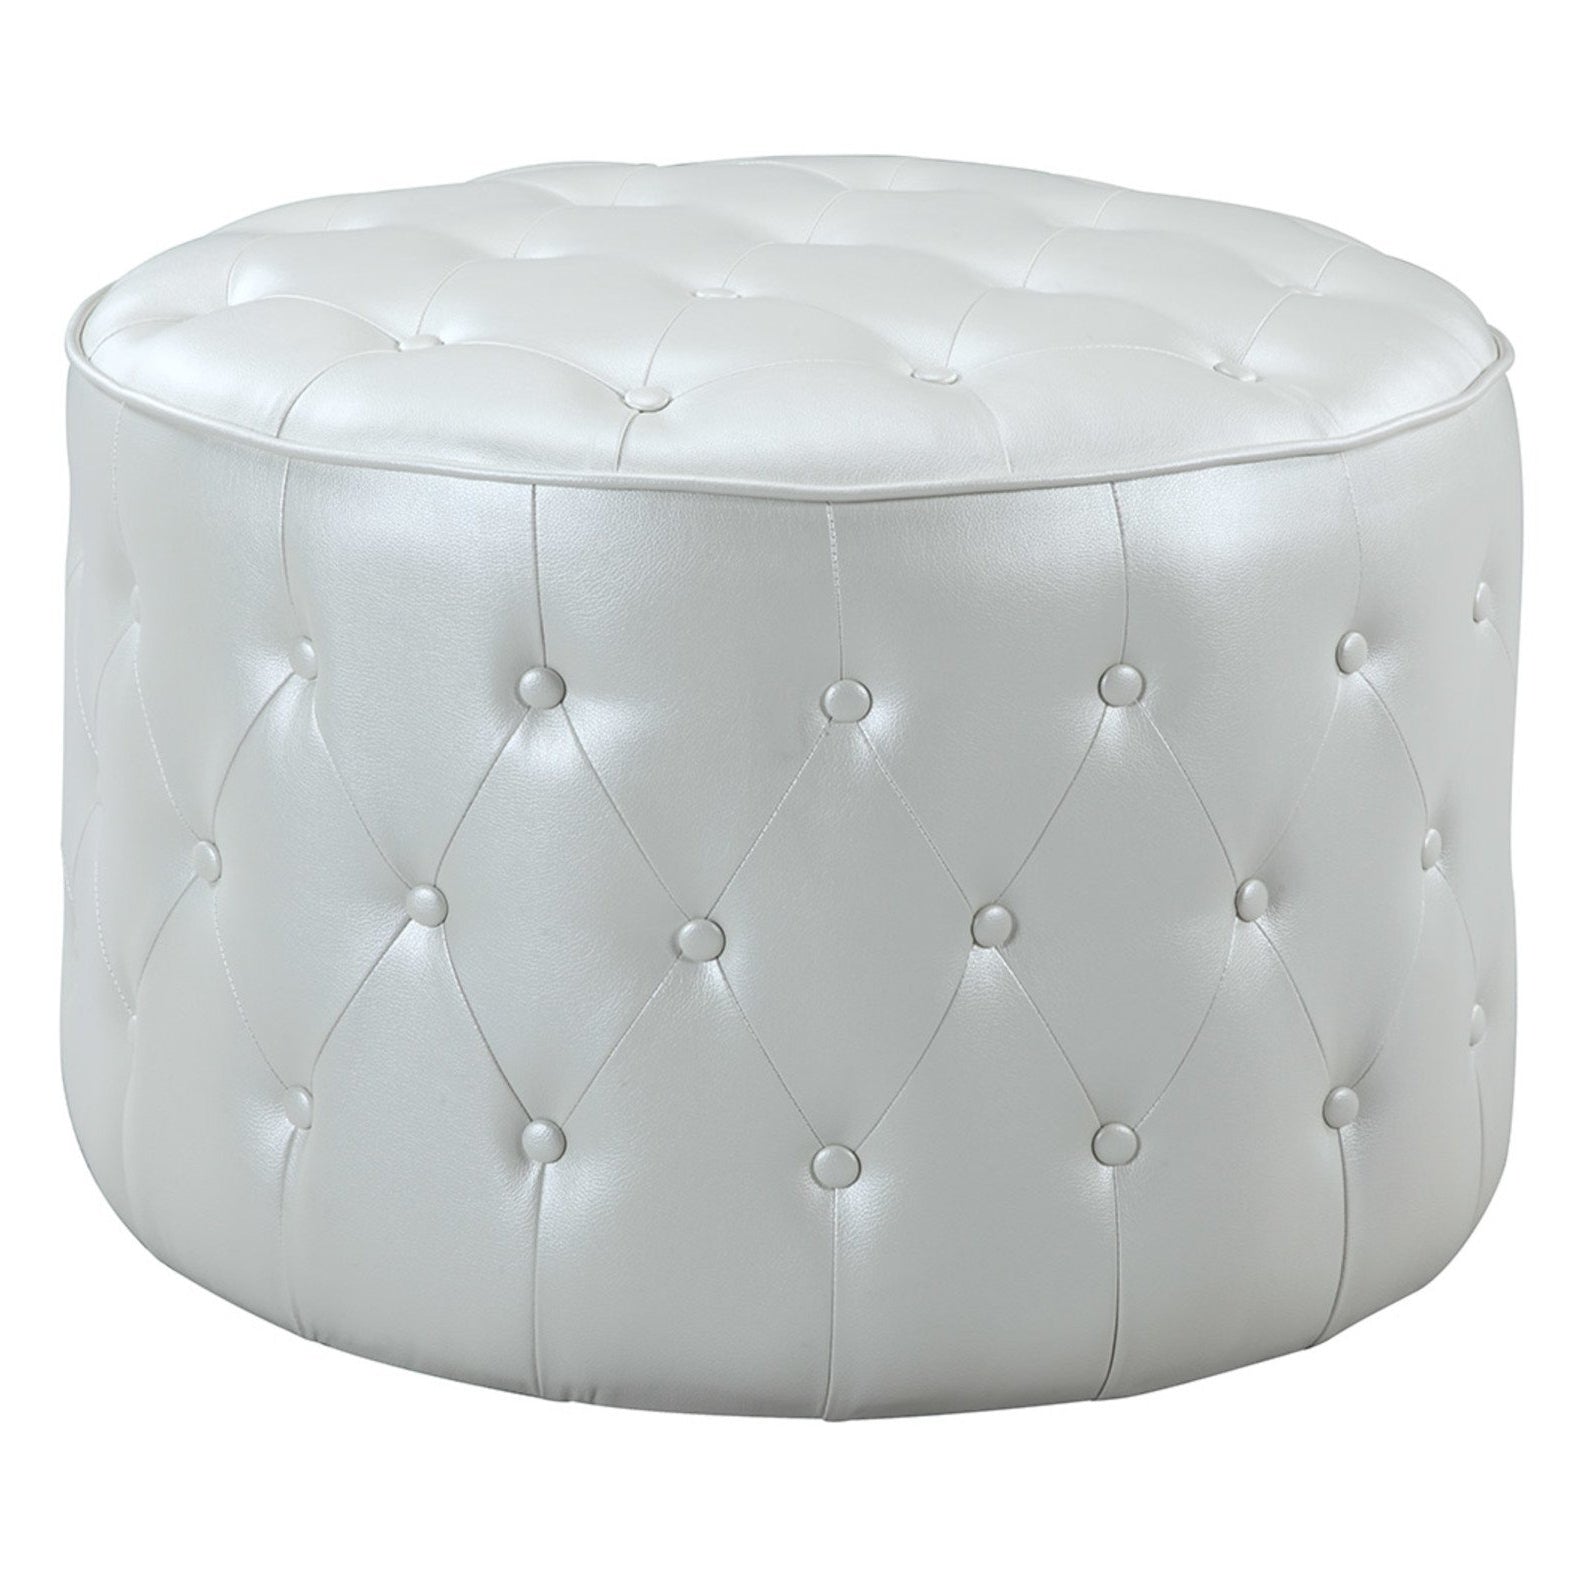 Tosh Tufted Faux Leather Round Ottoman Pouf